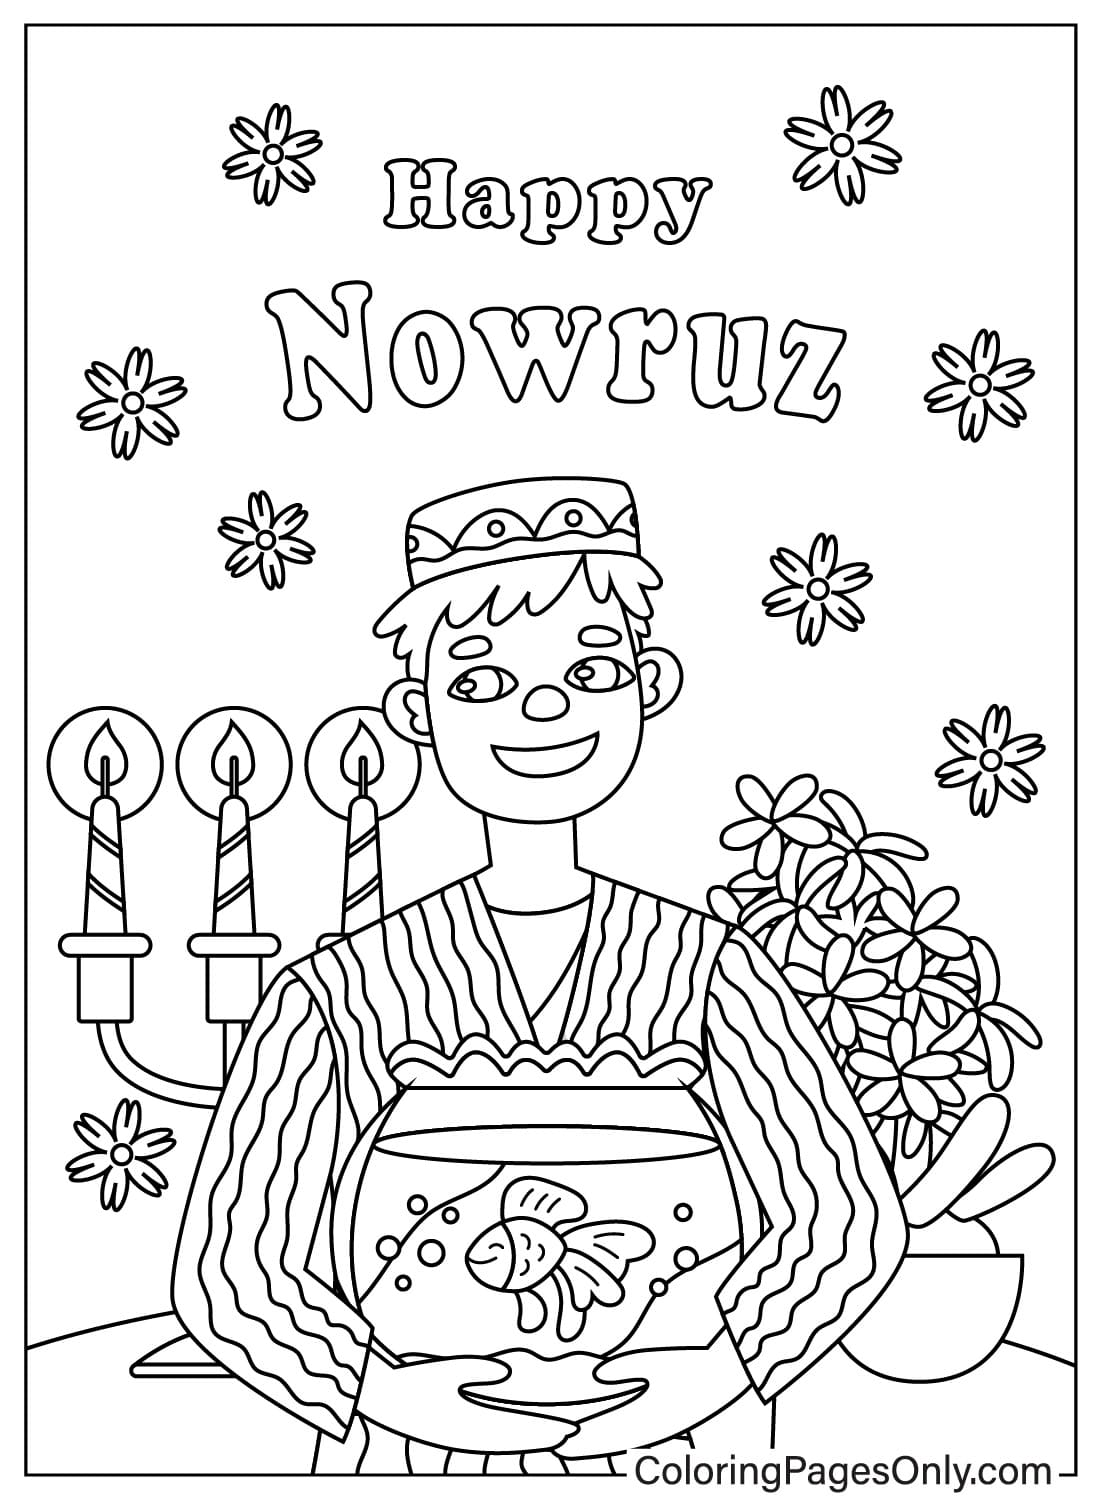 Pictures International Nowruz Day Coloring Page from International Nowruz Day